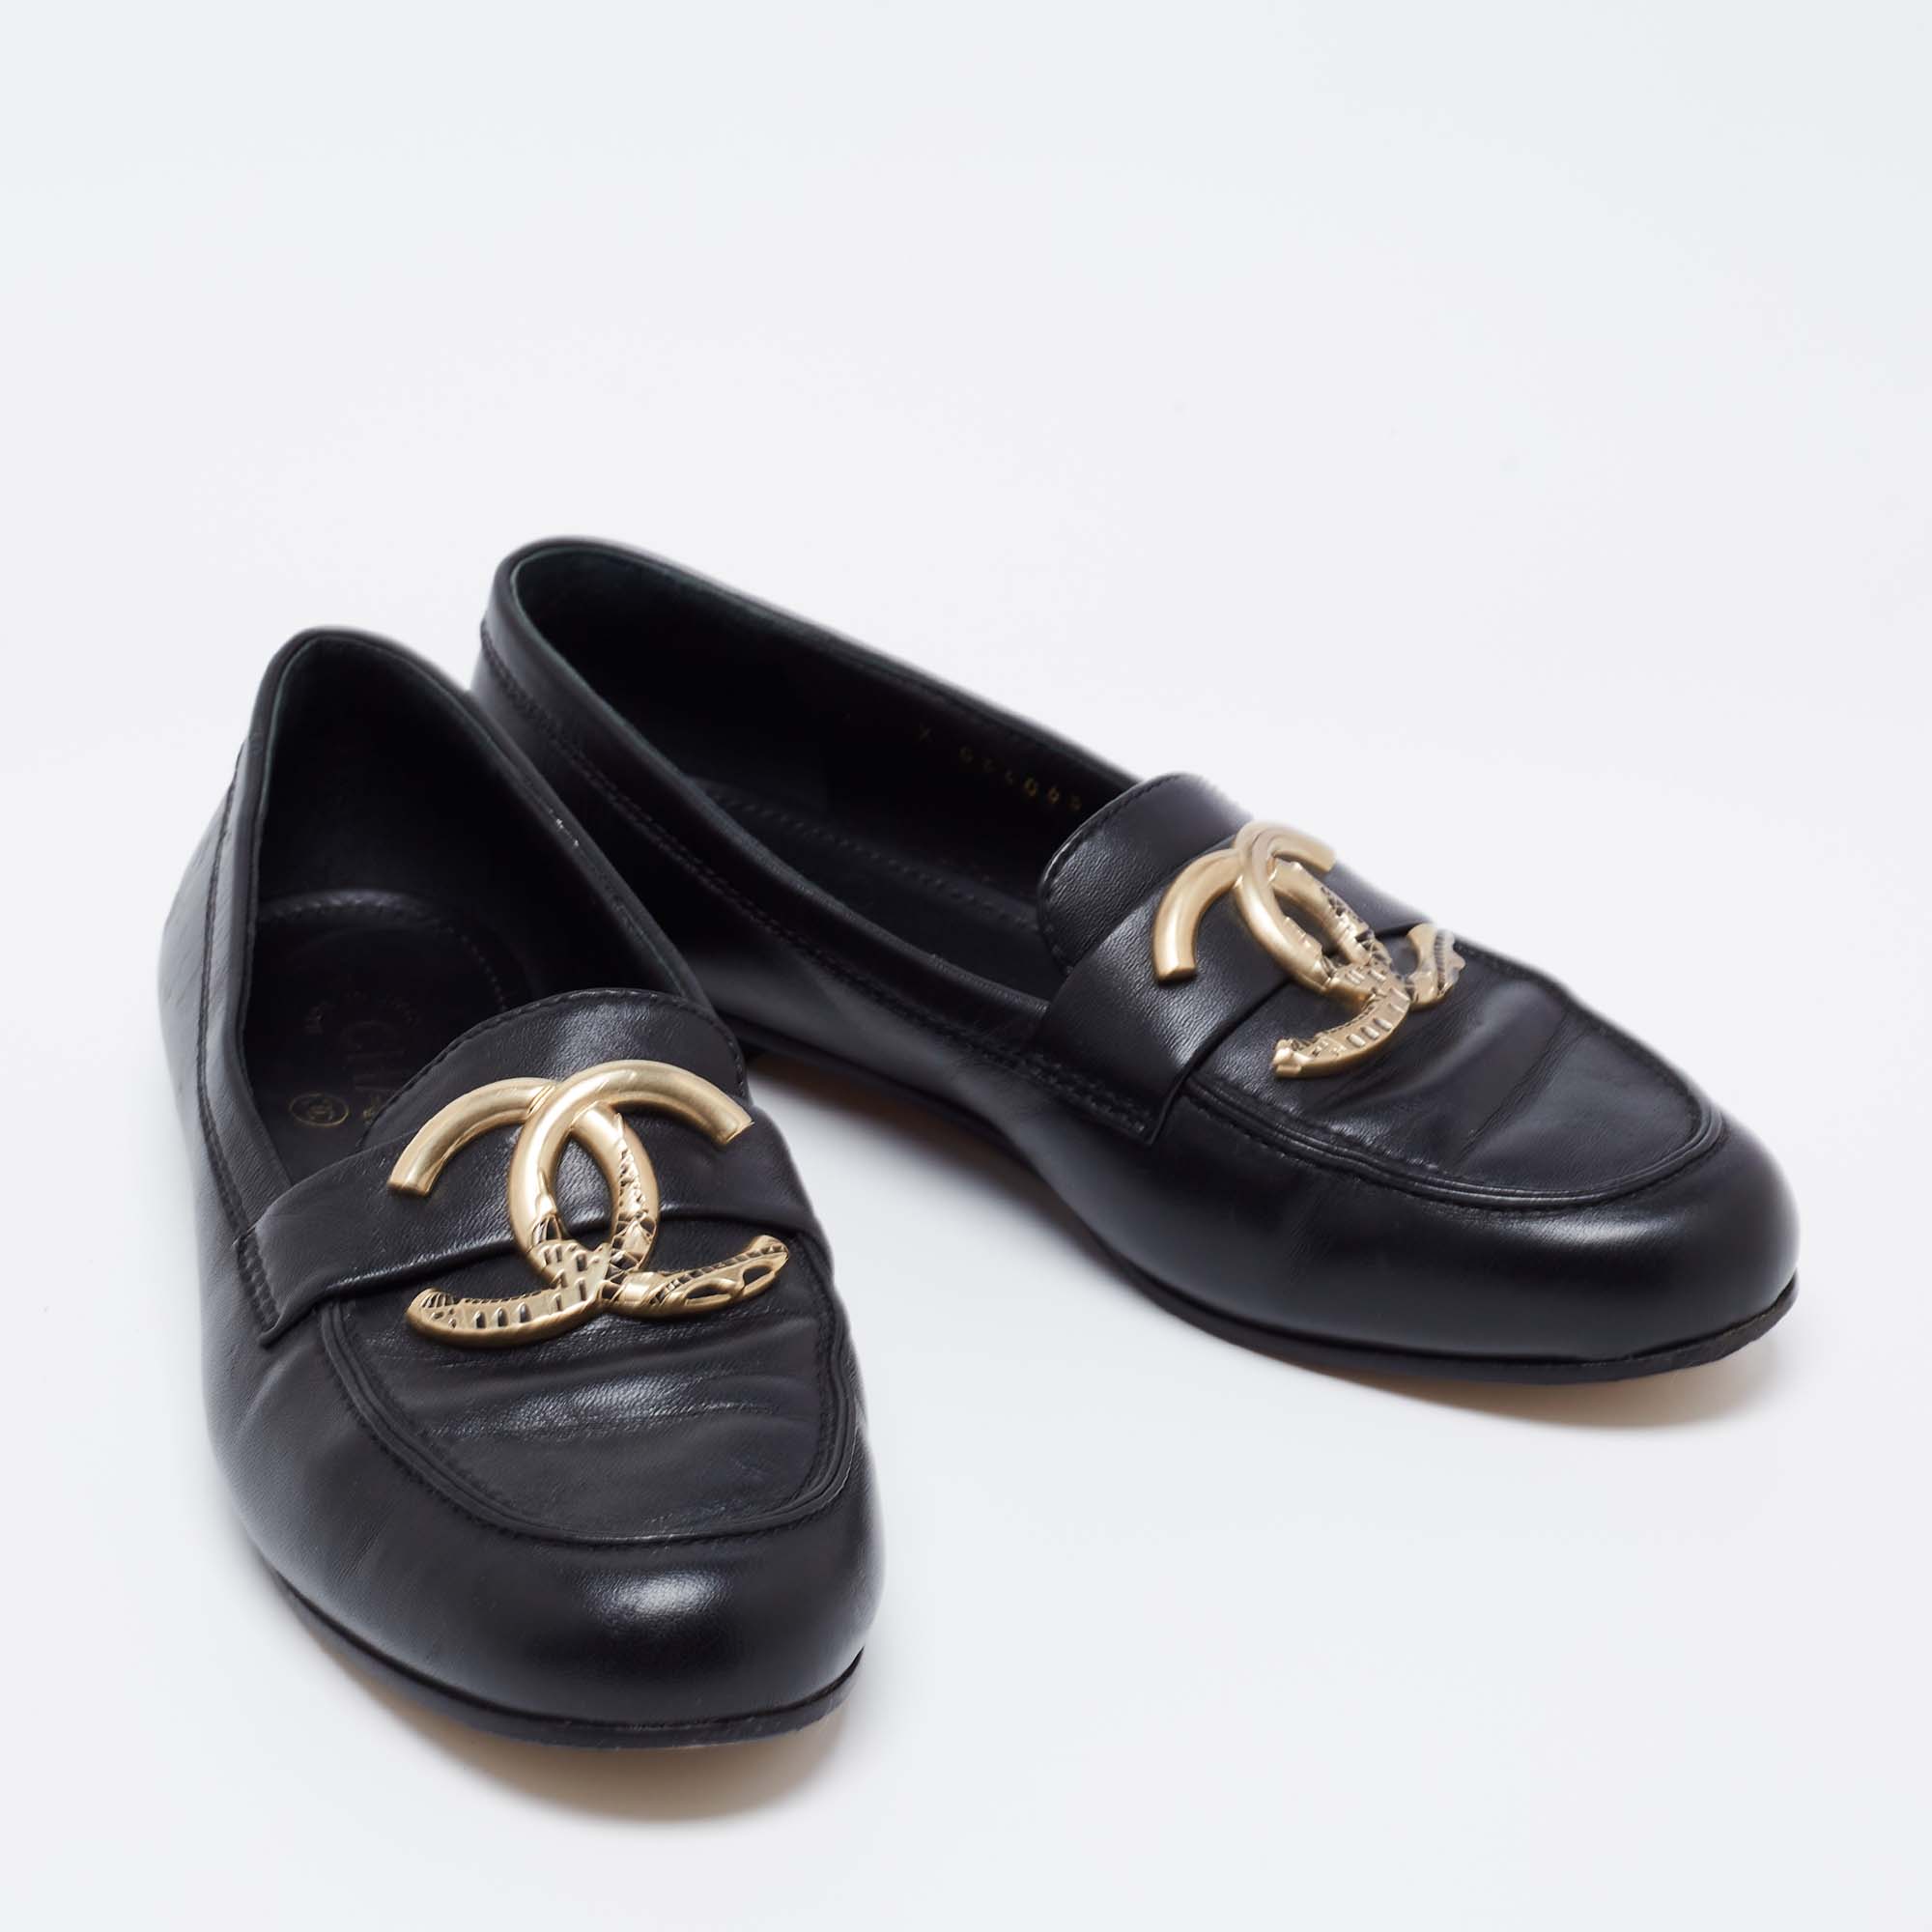 Chanel Black Leather Metal CC Slip On Loafers Size 38.5 Chanel